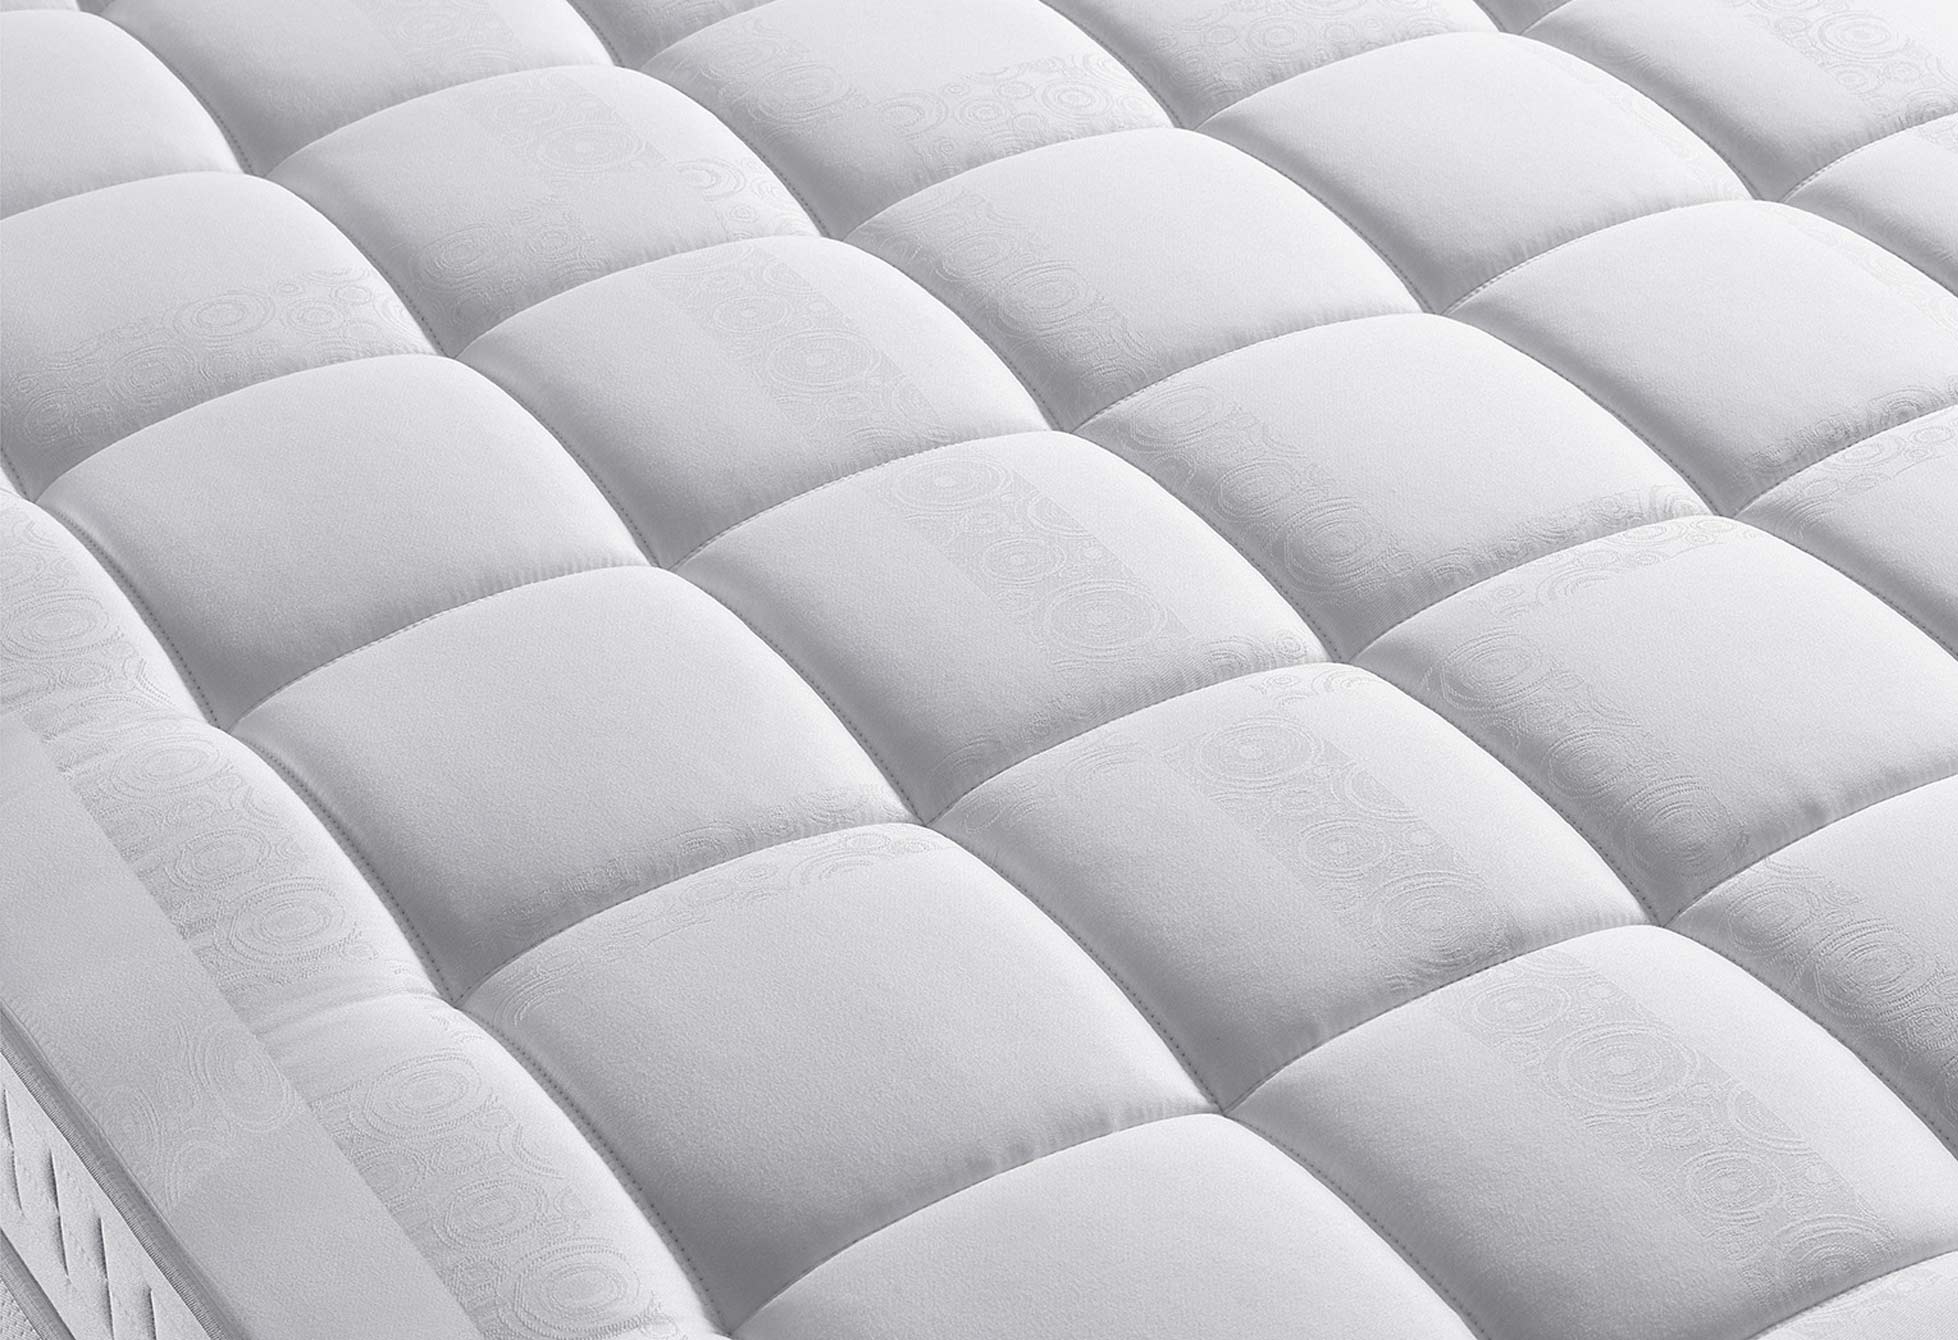 Matelas Ressorts Simmons FIRST S5  140x190 (2 pers)